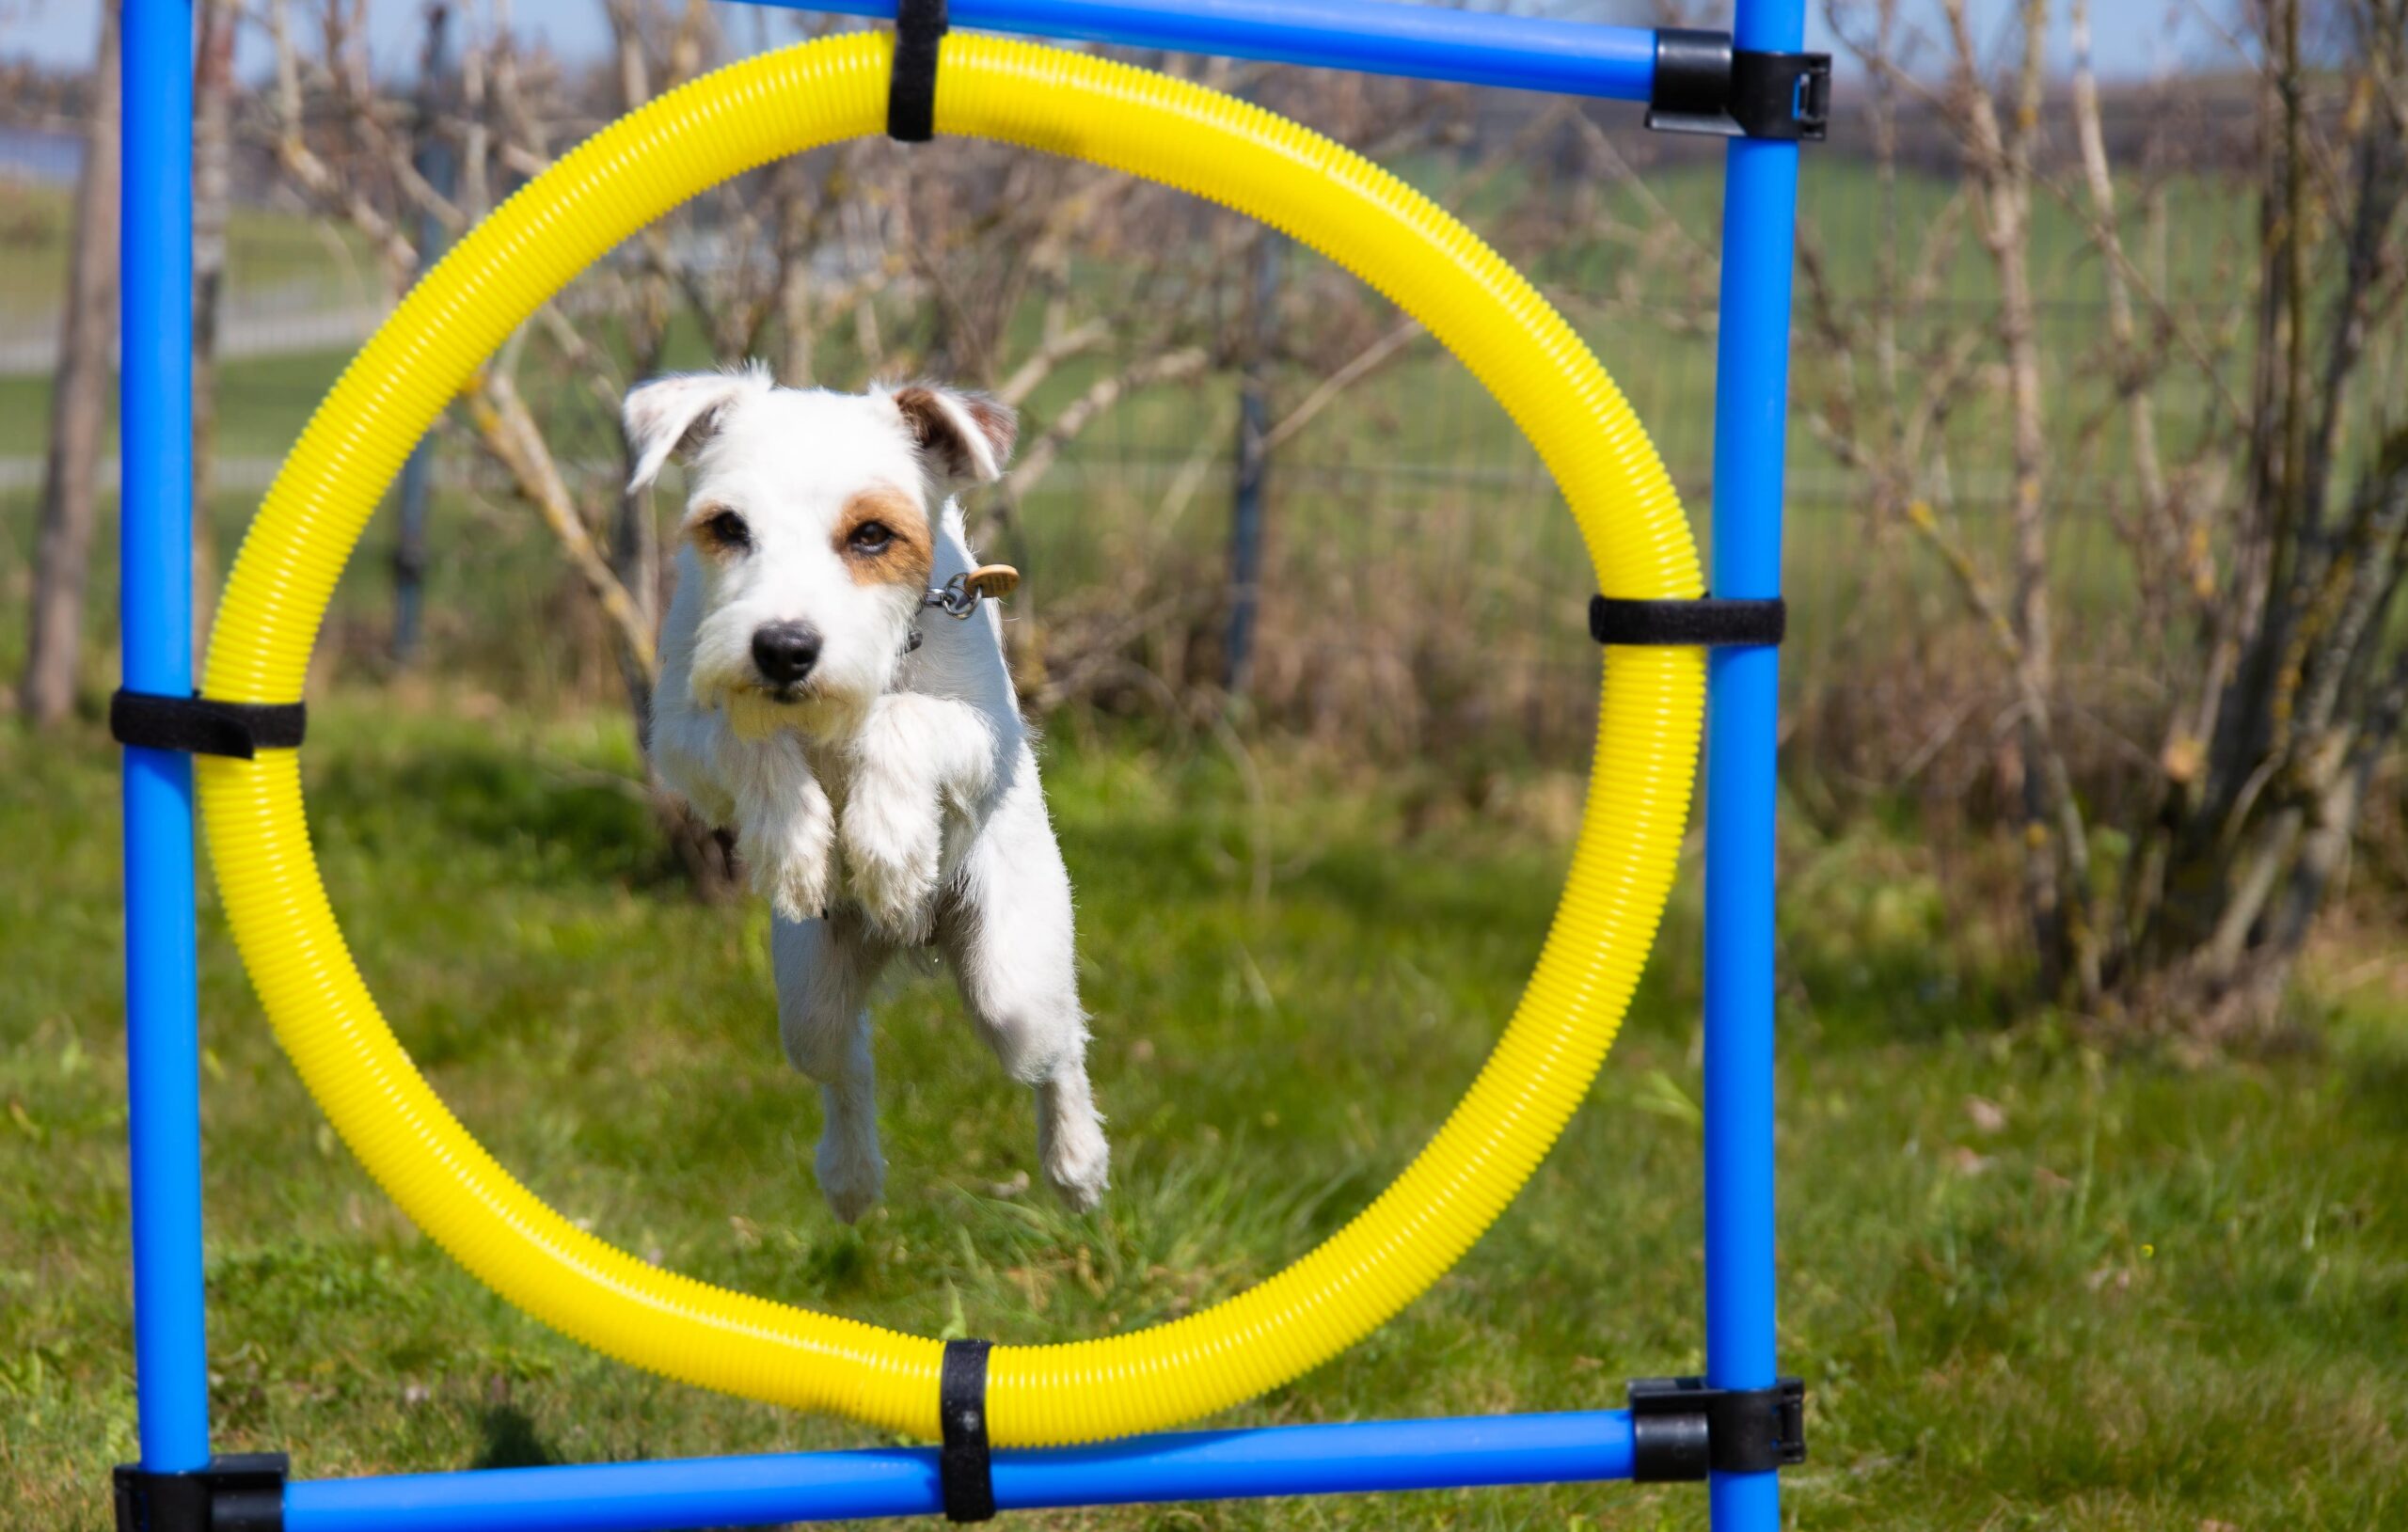 https://blog.omlet.us/wp-content/uploads/sites/6/2023/01/Dog-doing-dog-obstacle-course-jumping-through-a-ring-scaled.jpg